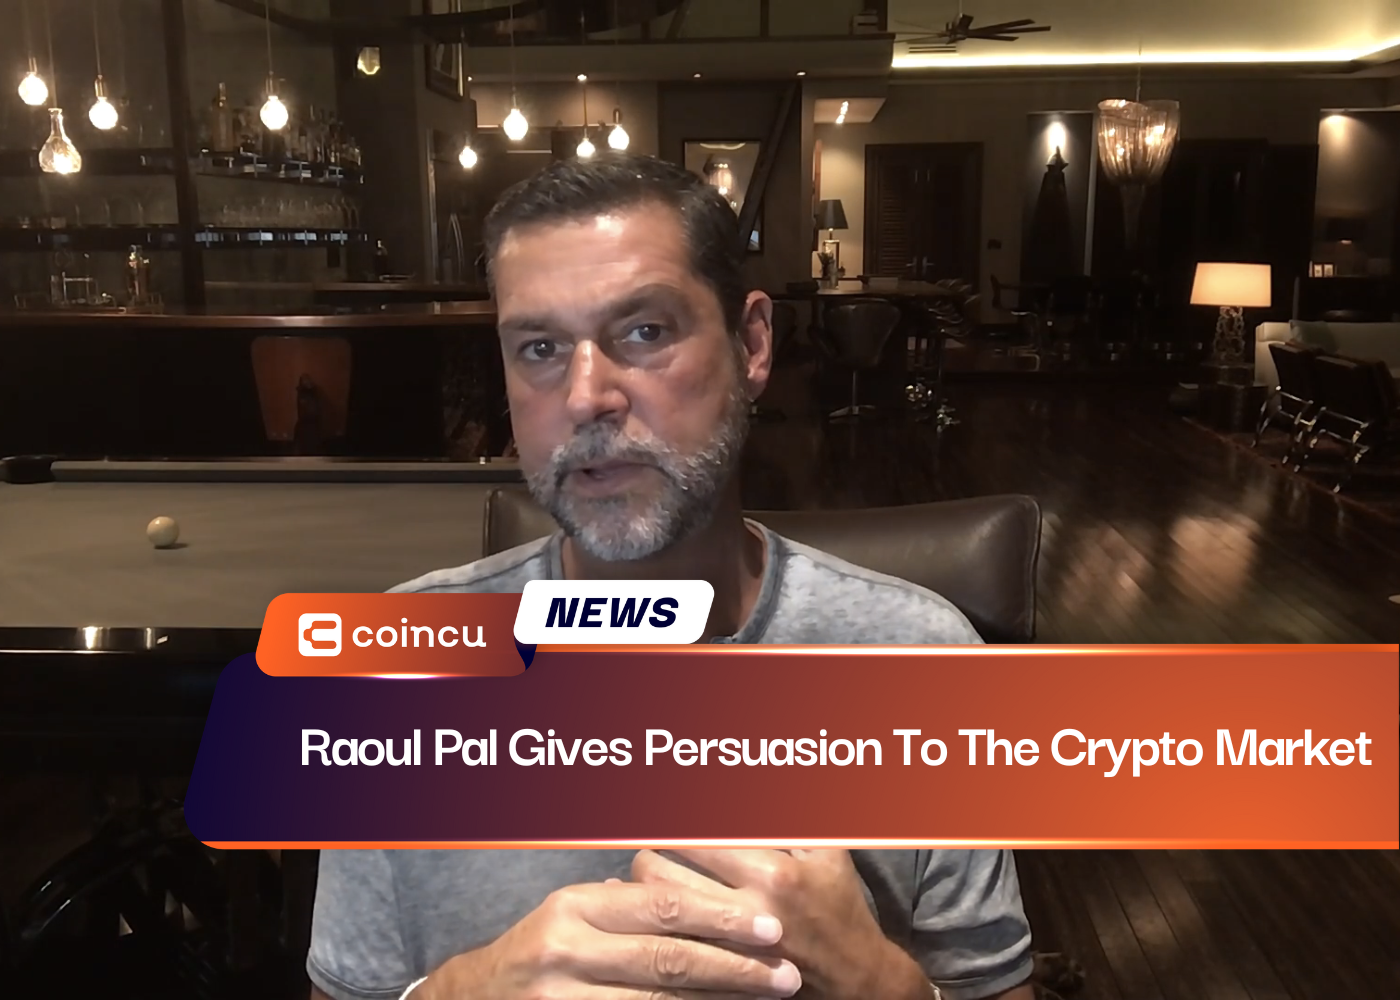 Raoul Pal Gives Persuasion To The Crypto Market